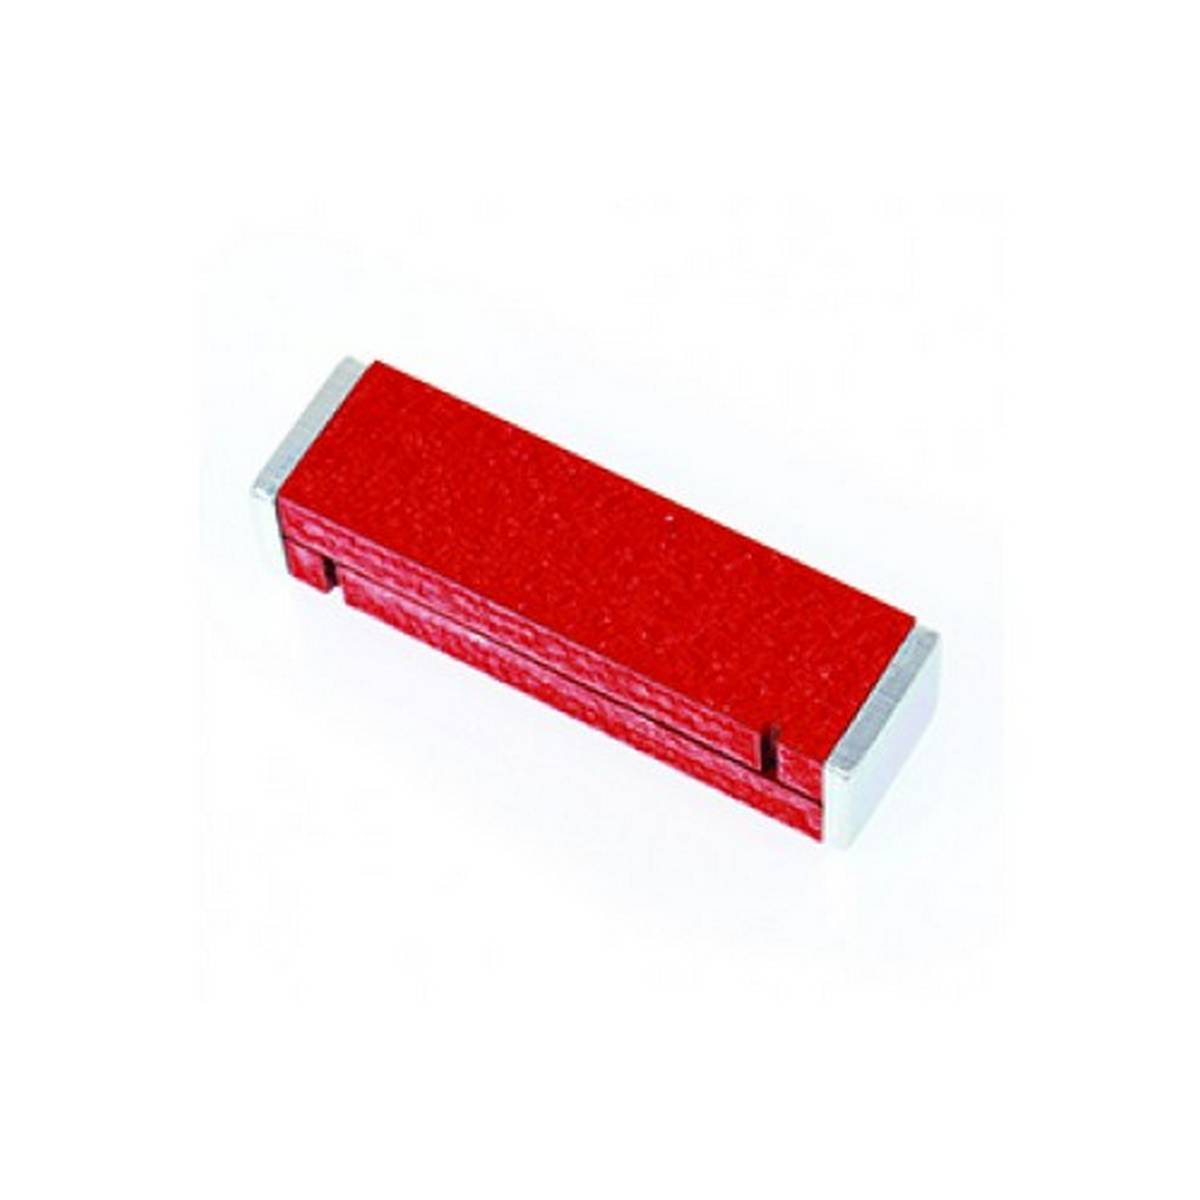 Alnico Bar Magnet 50 x 15 x 10mm - Pack of 2